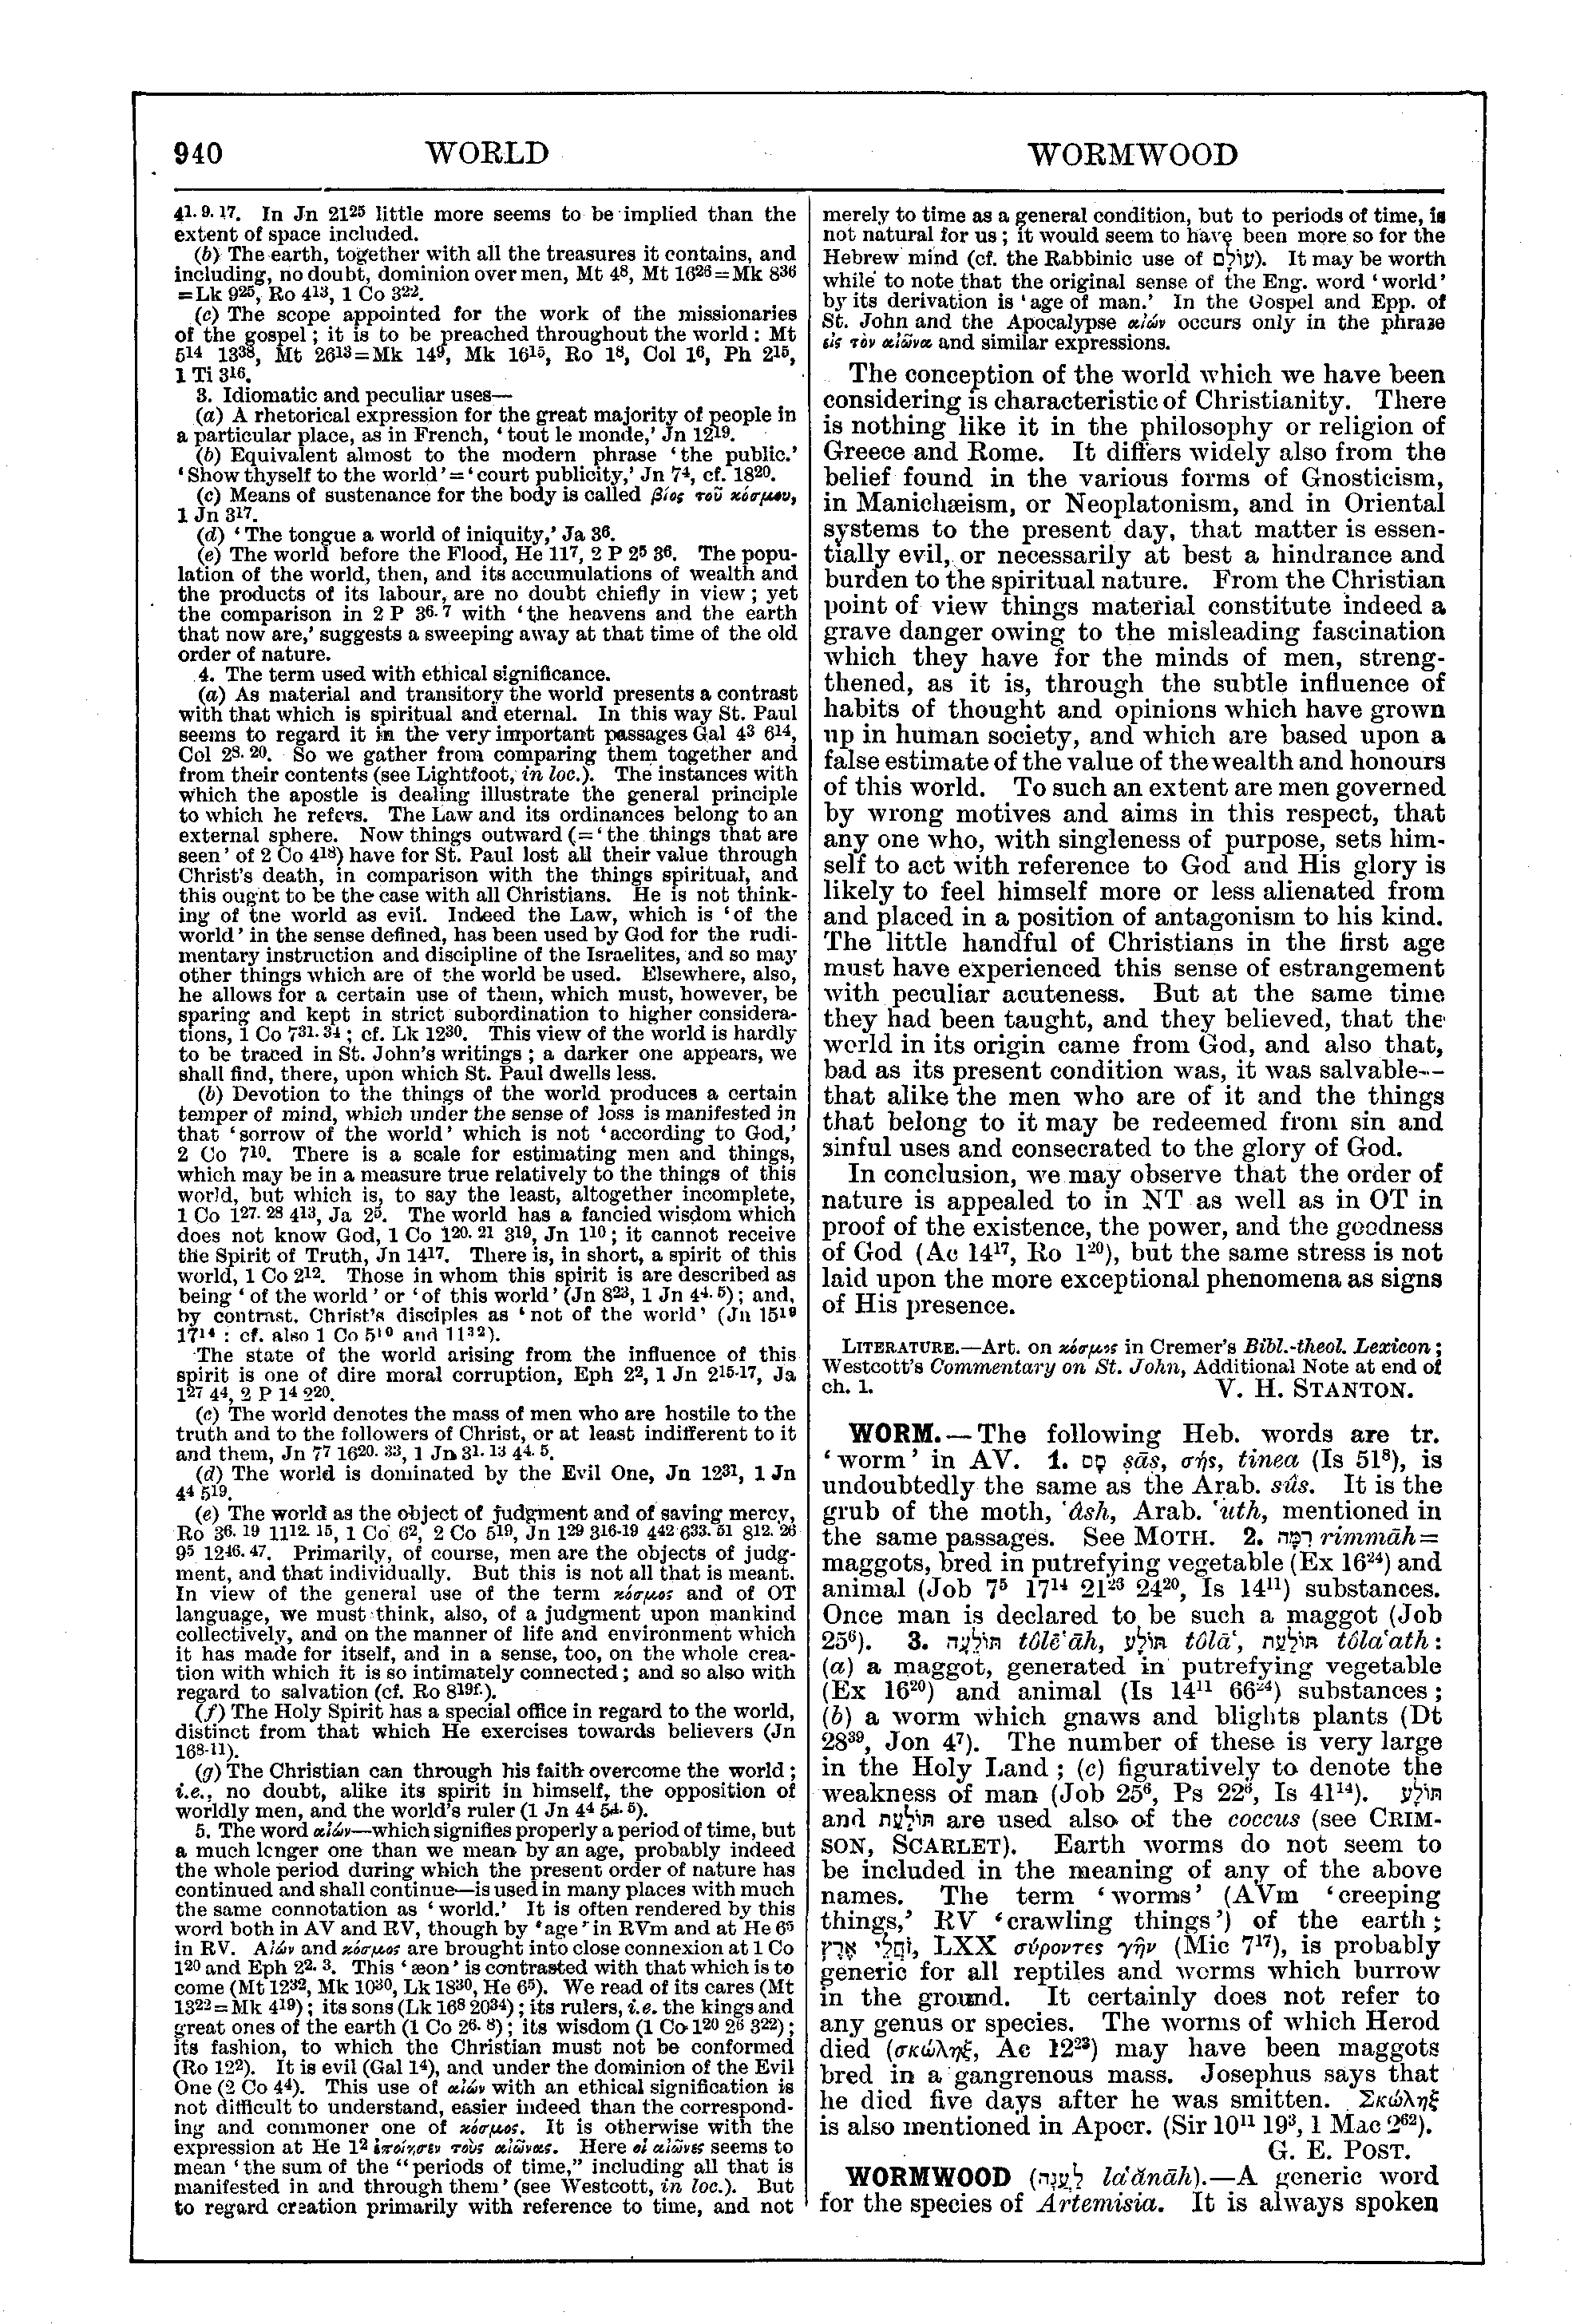 Image of page 940